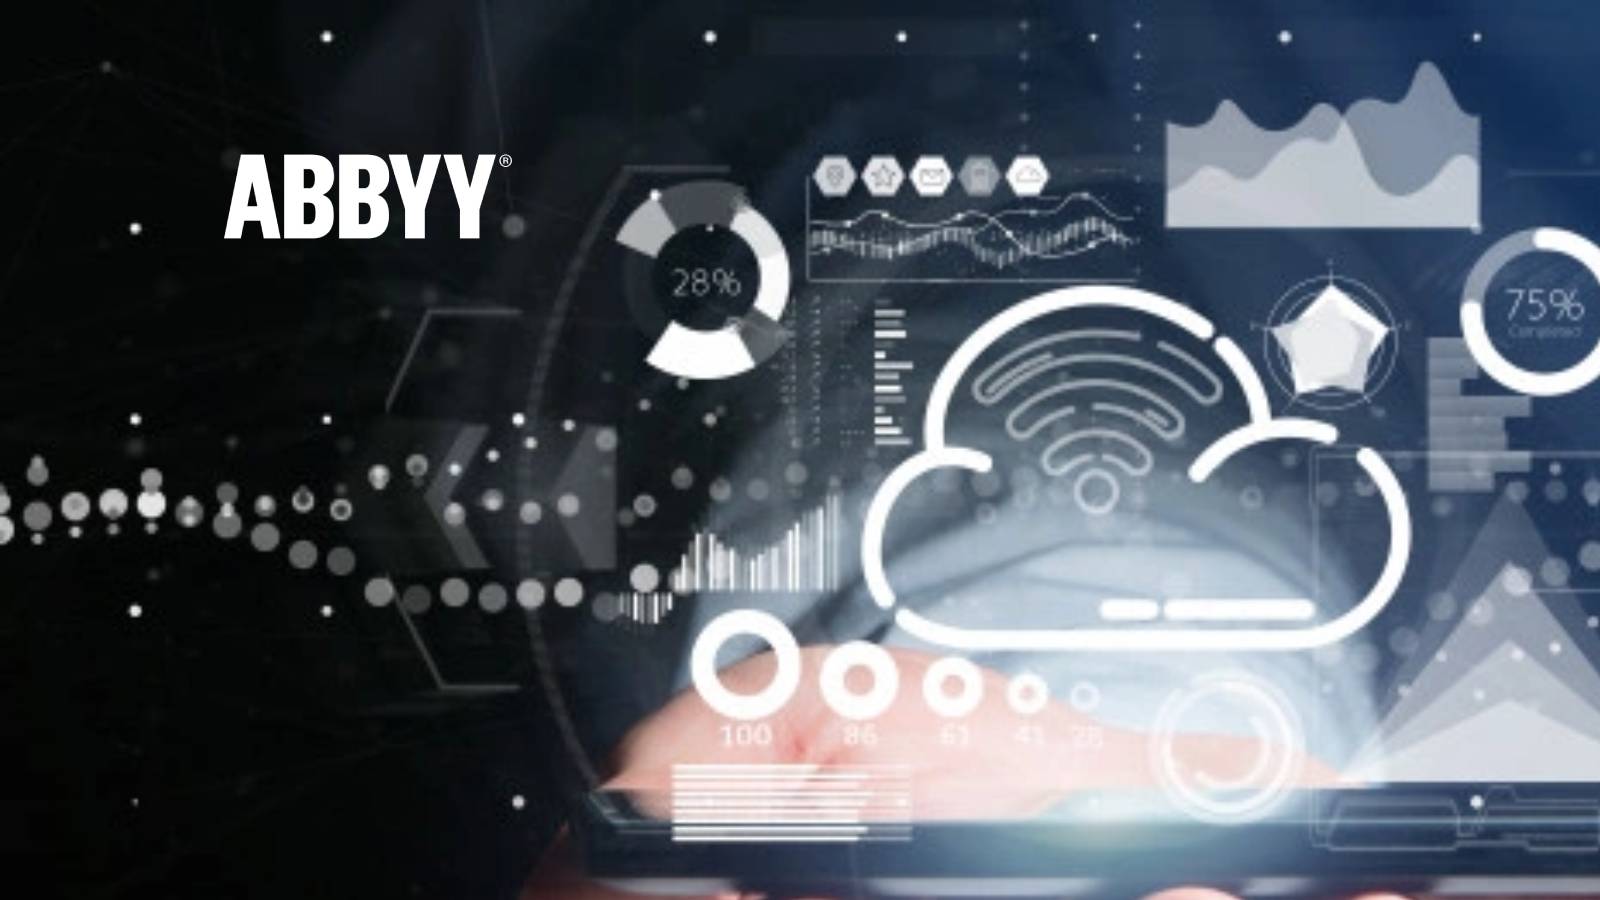 ABBYY Declares September as Intelligent Automation Month